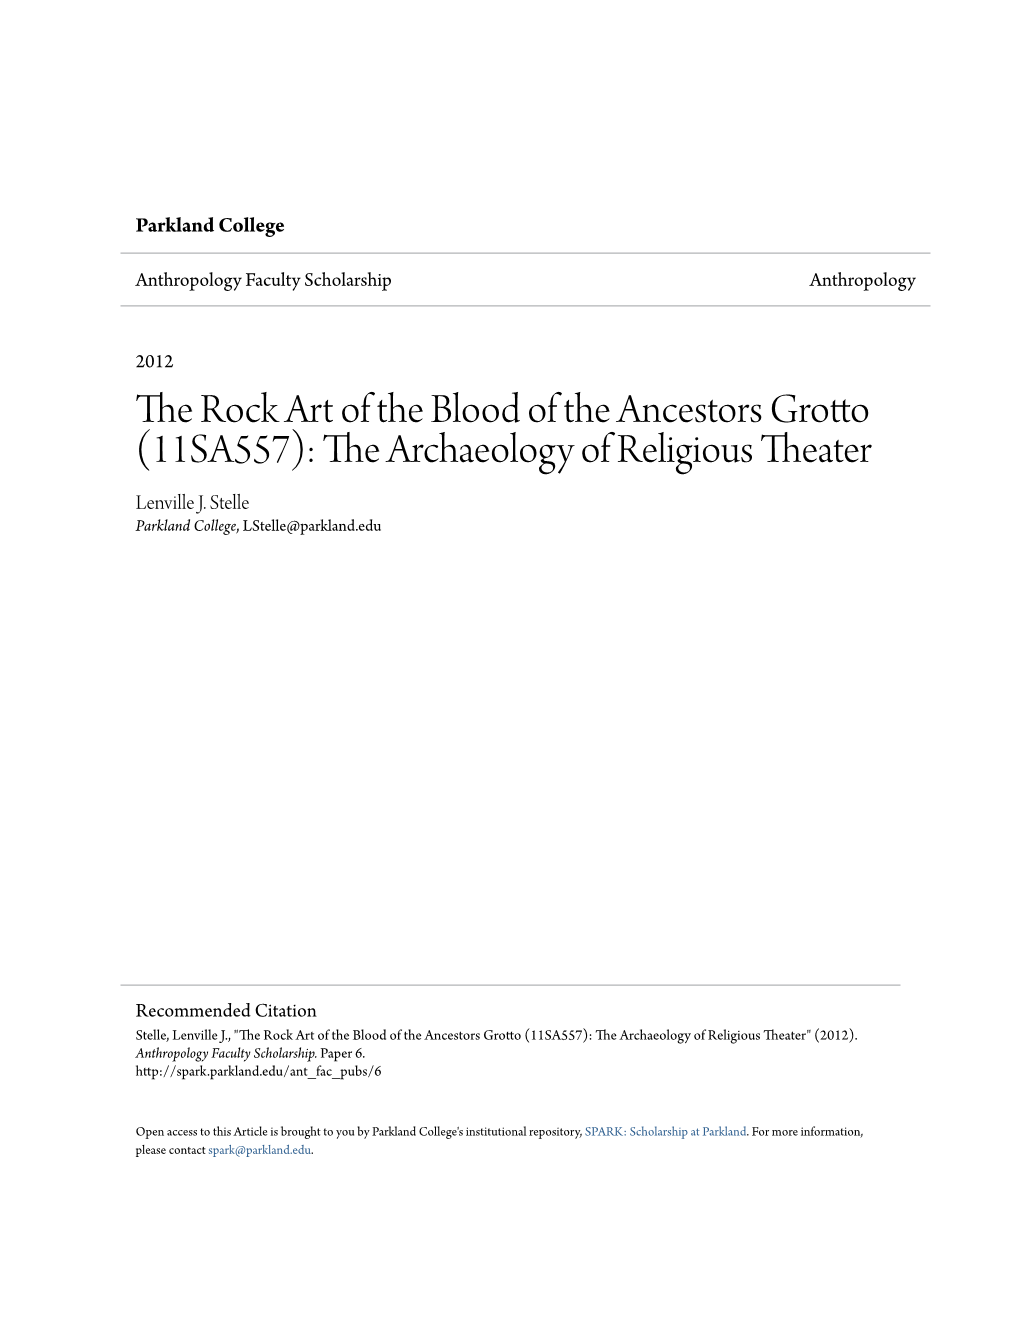 The Rock Art of the Blood of the Ancestors Grotto (11SA557): the Archaeology of Religious Theater Lenville J